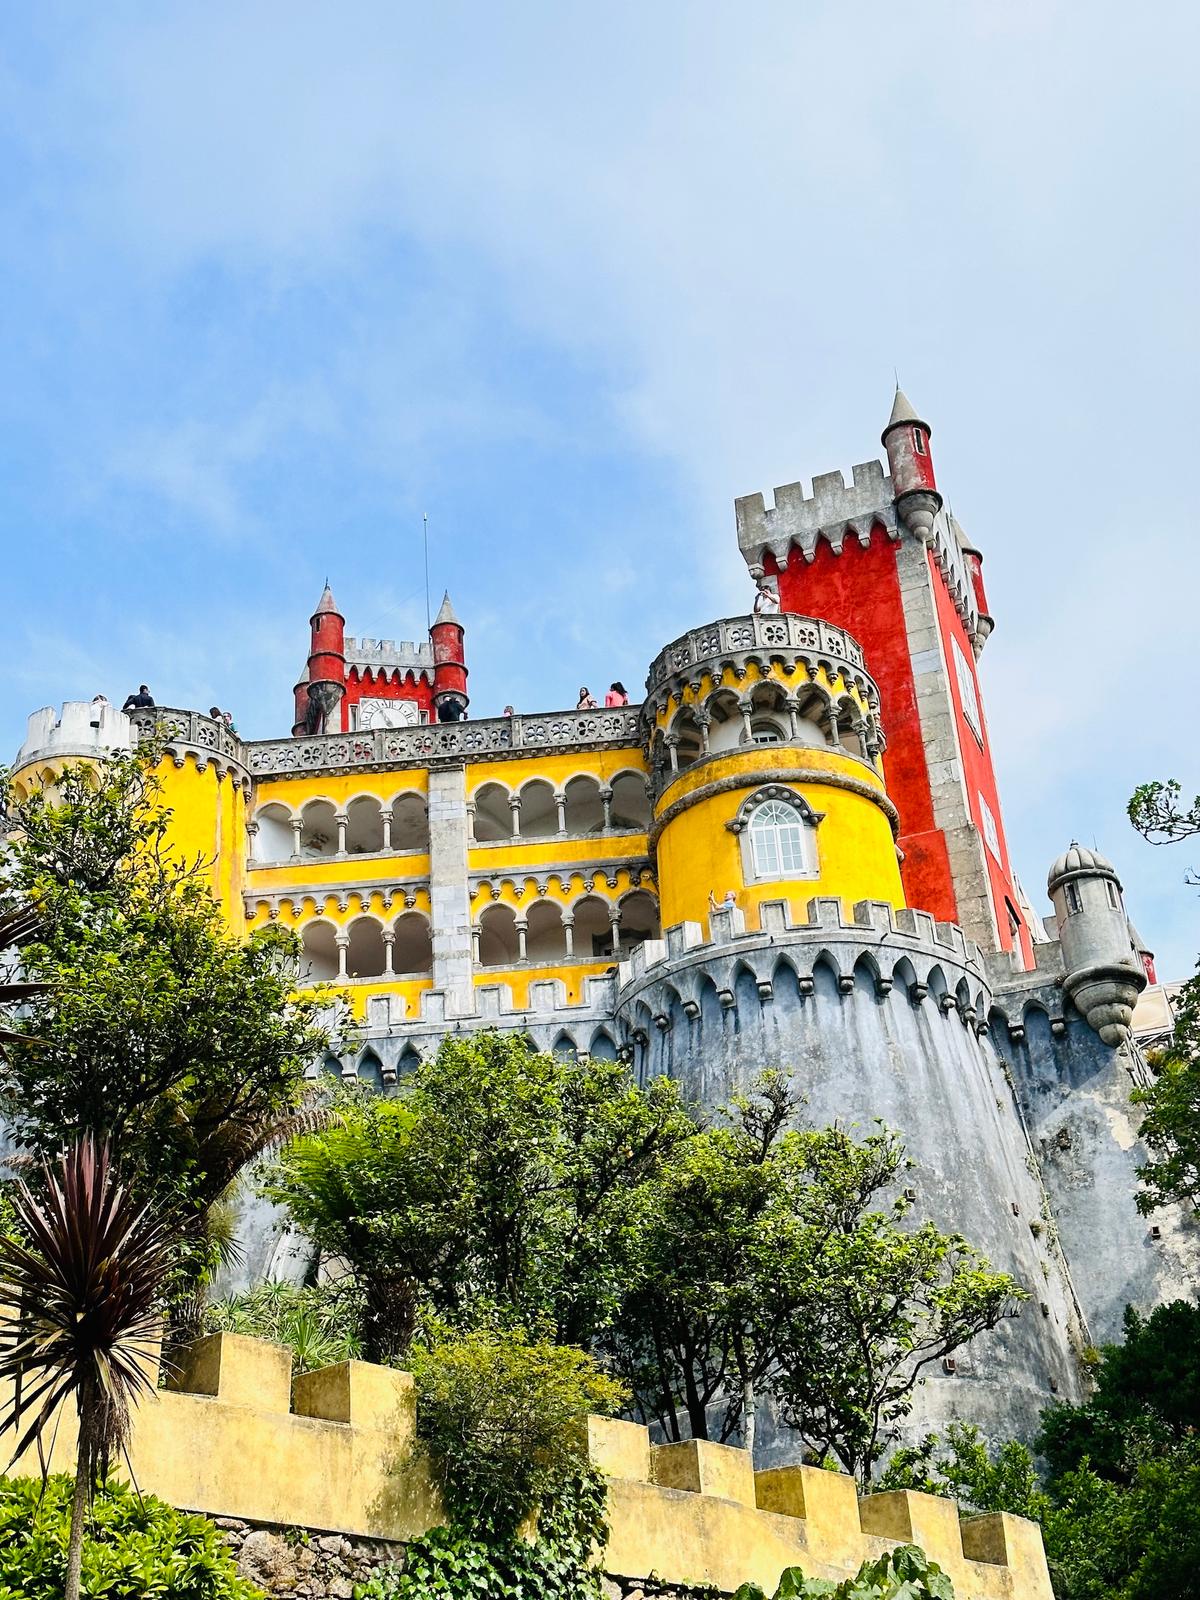 The Pena Palace, Portugal. (SWNS)